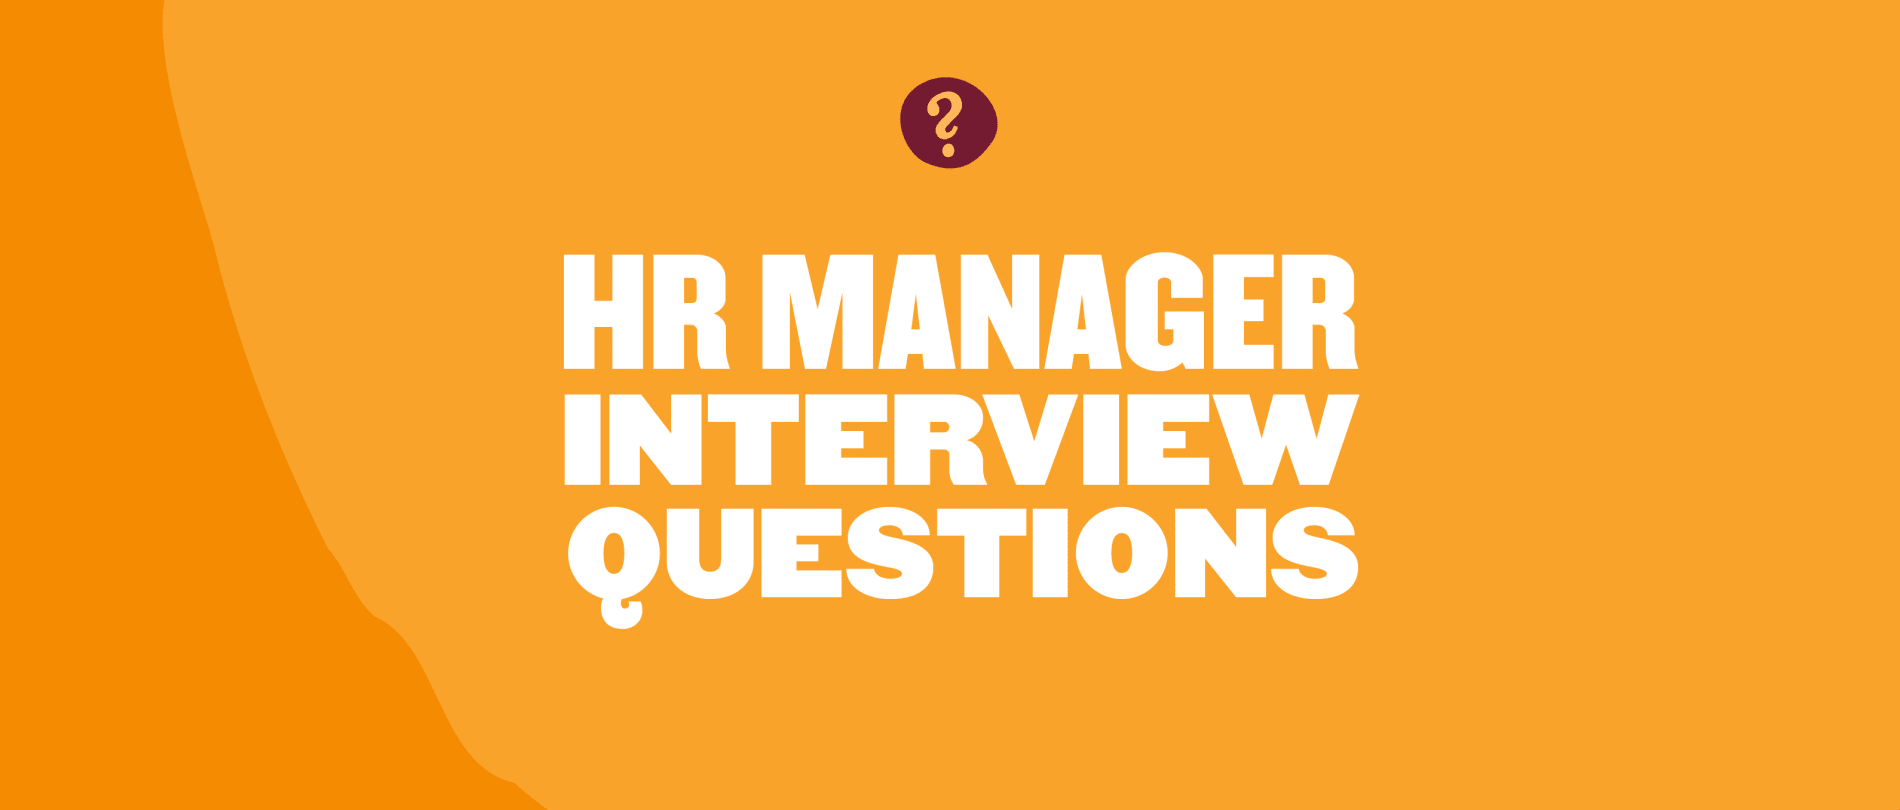 30 HR Manager Interview Questions To Ask Candidates